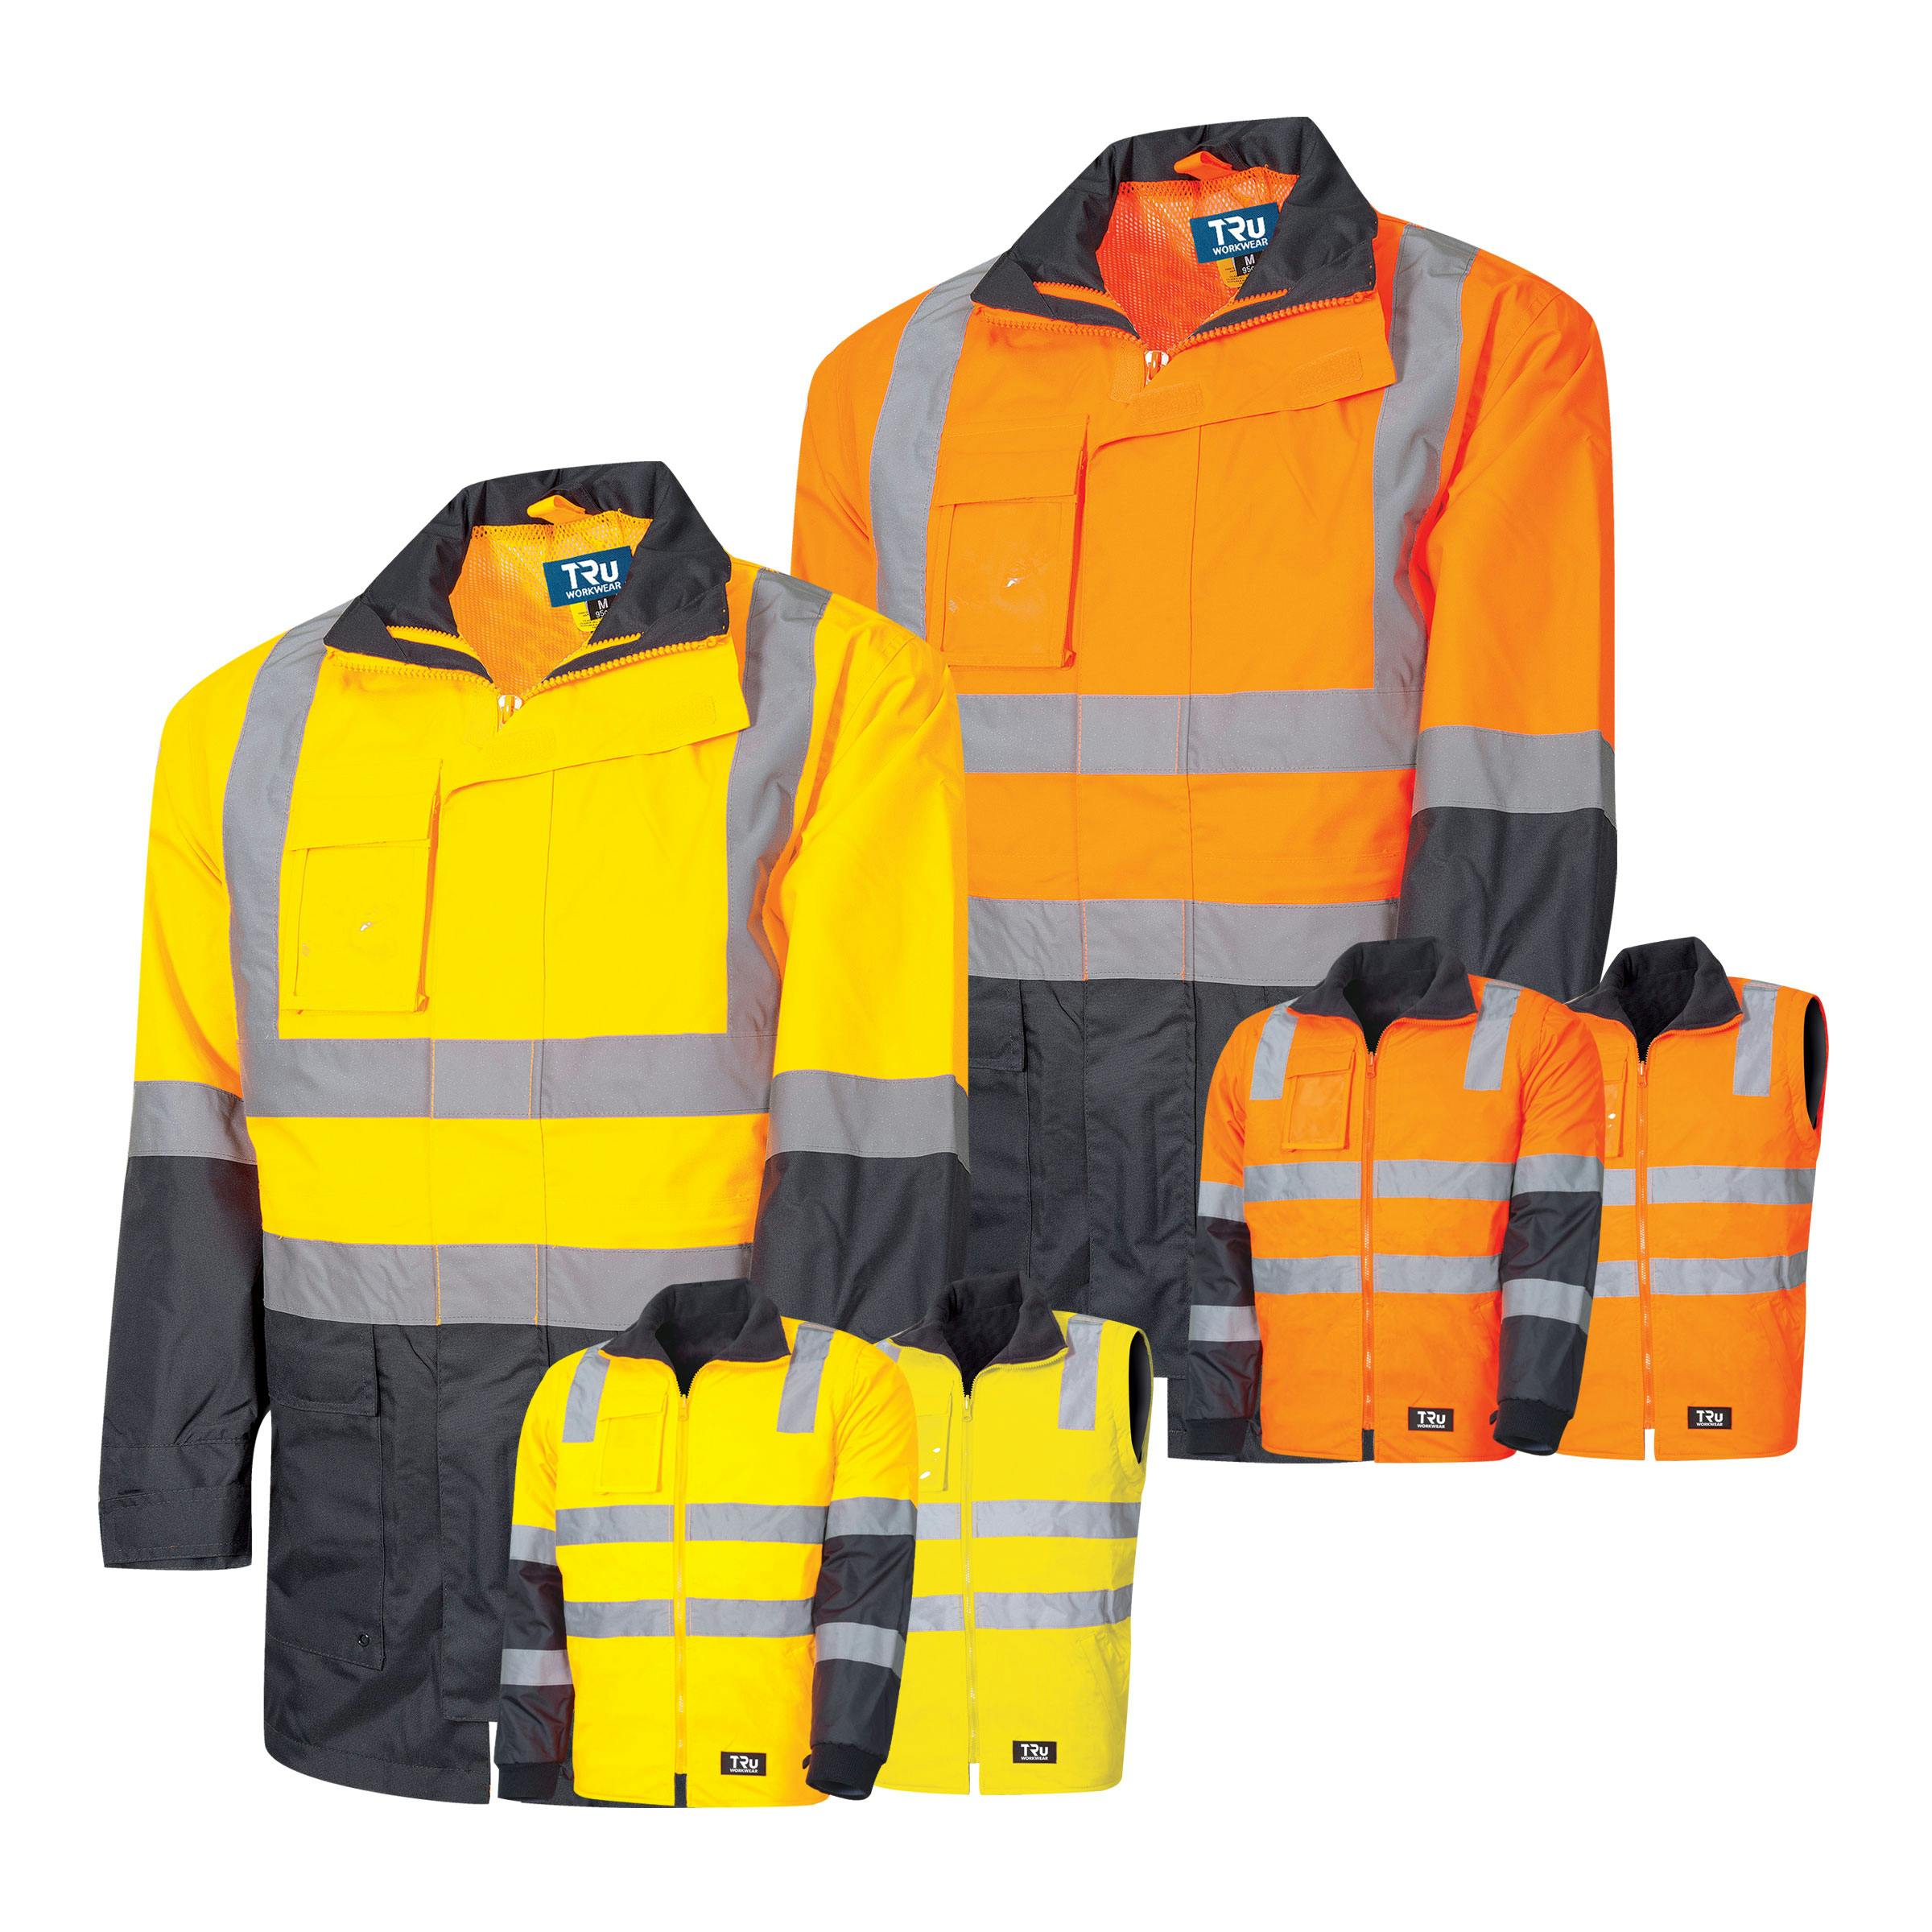 TRu Workwear Jacket 6 In 1 With Jacket Poly Oxford With Tru Reflective Tape, Inner Jacket With Removable Sleeves